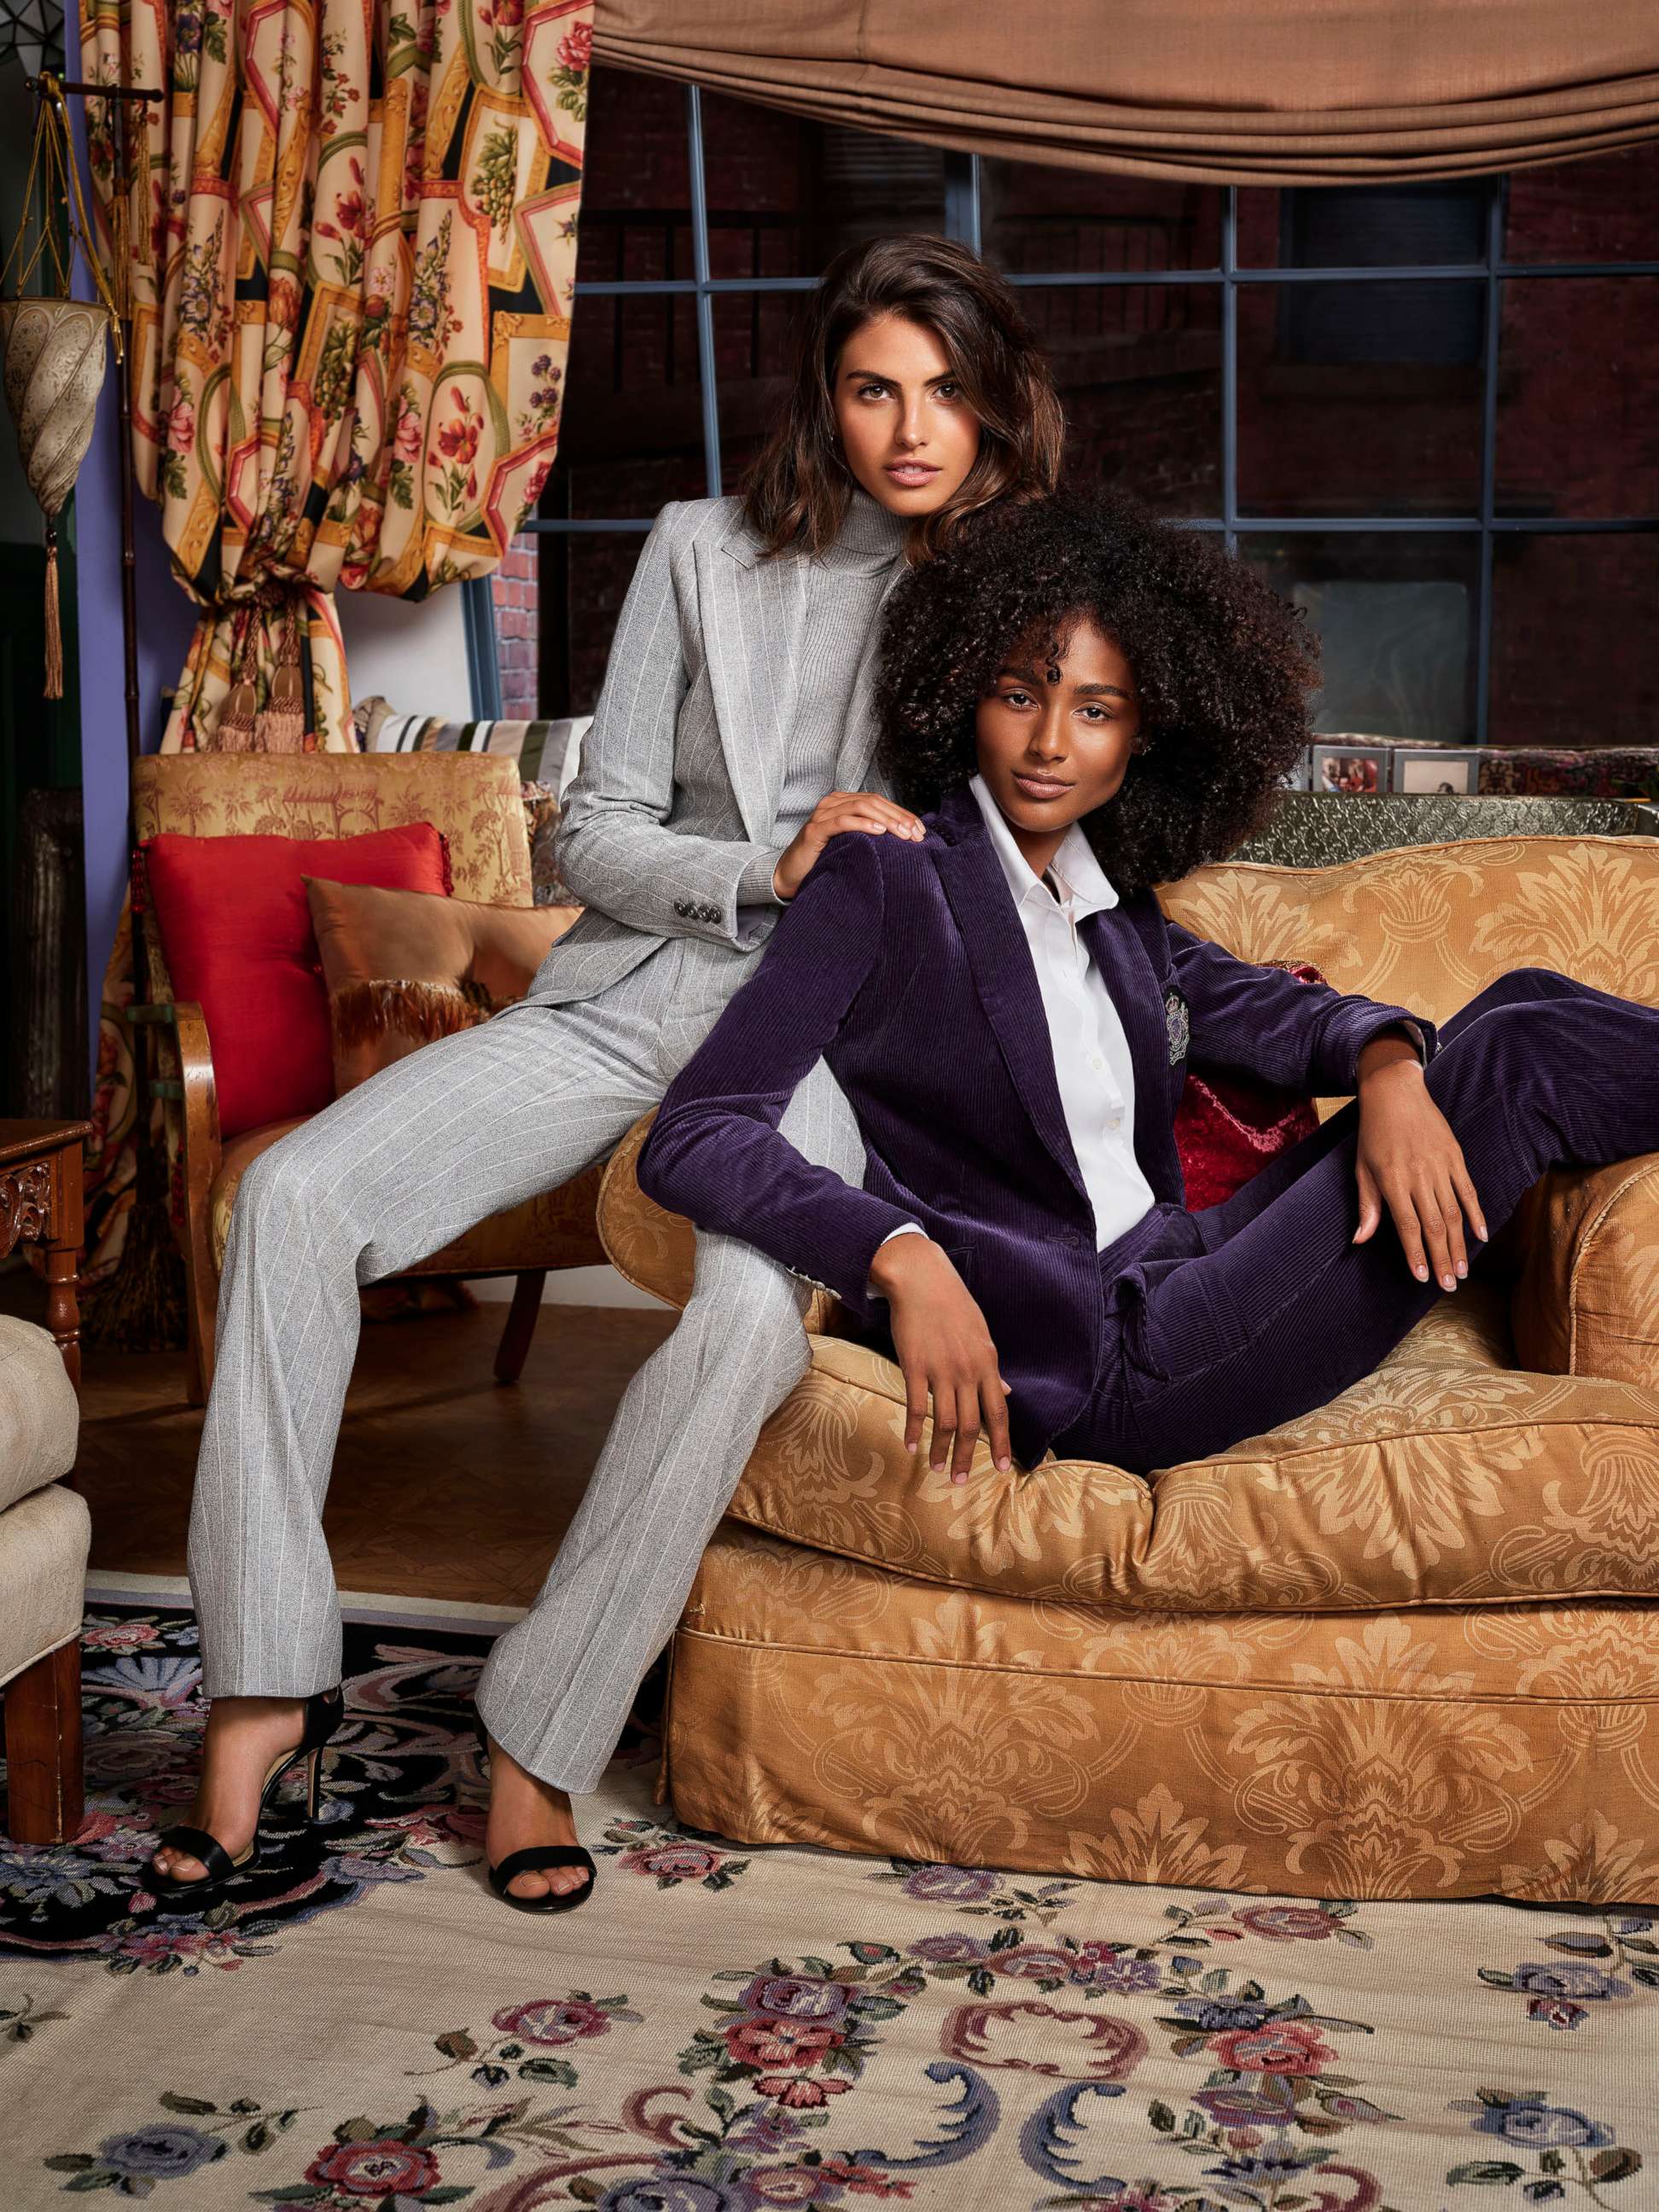 PHOTO: Ralph Lauren celebrates the 25th anniversary of "Friends" with new collection.